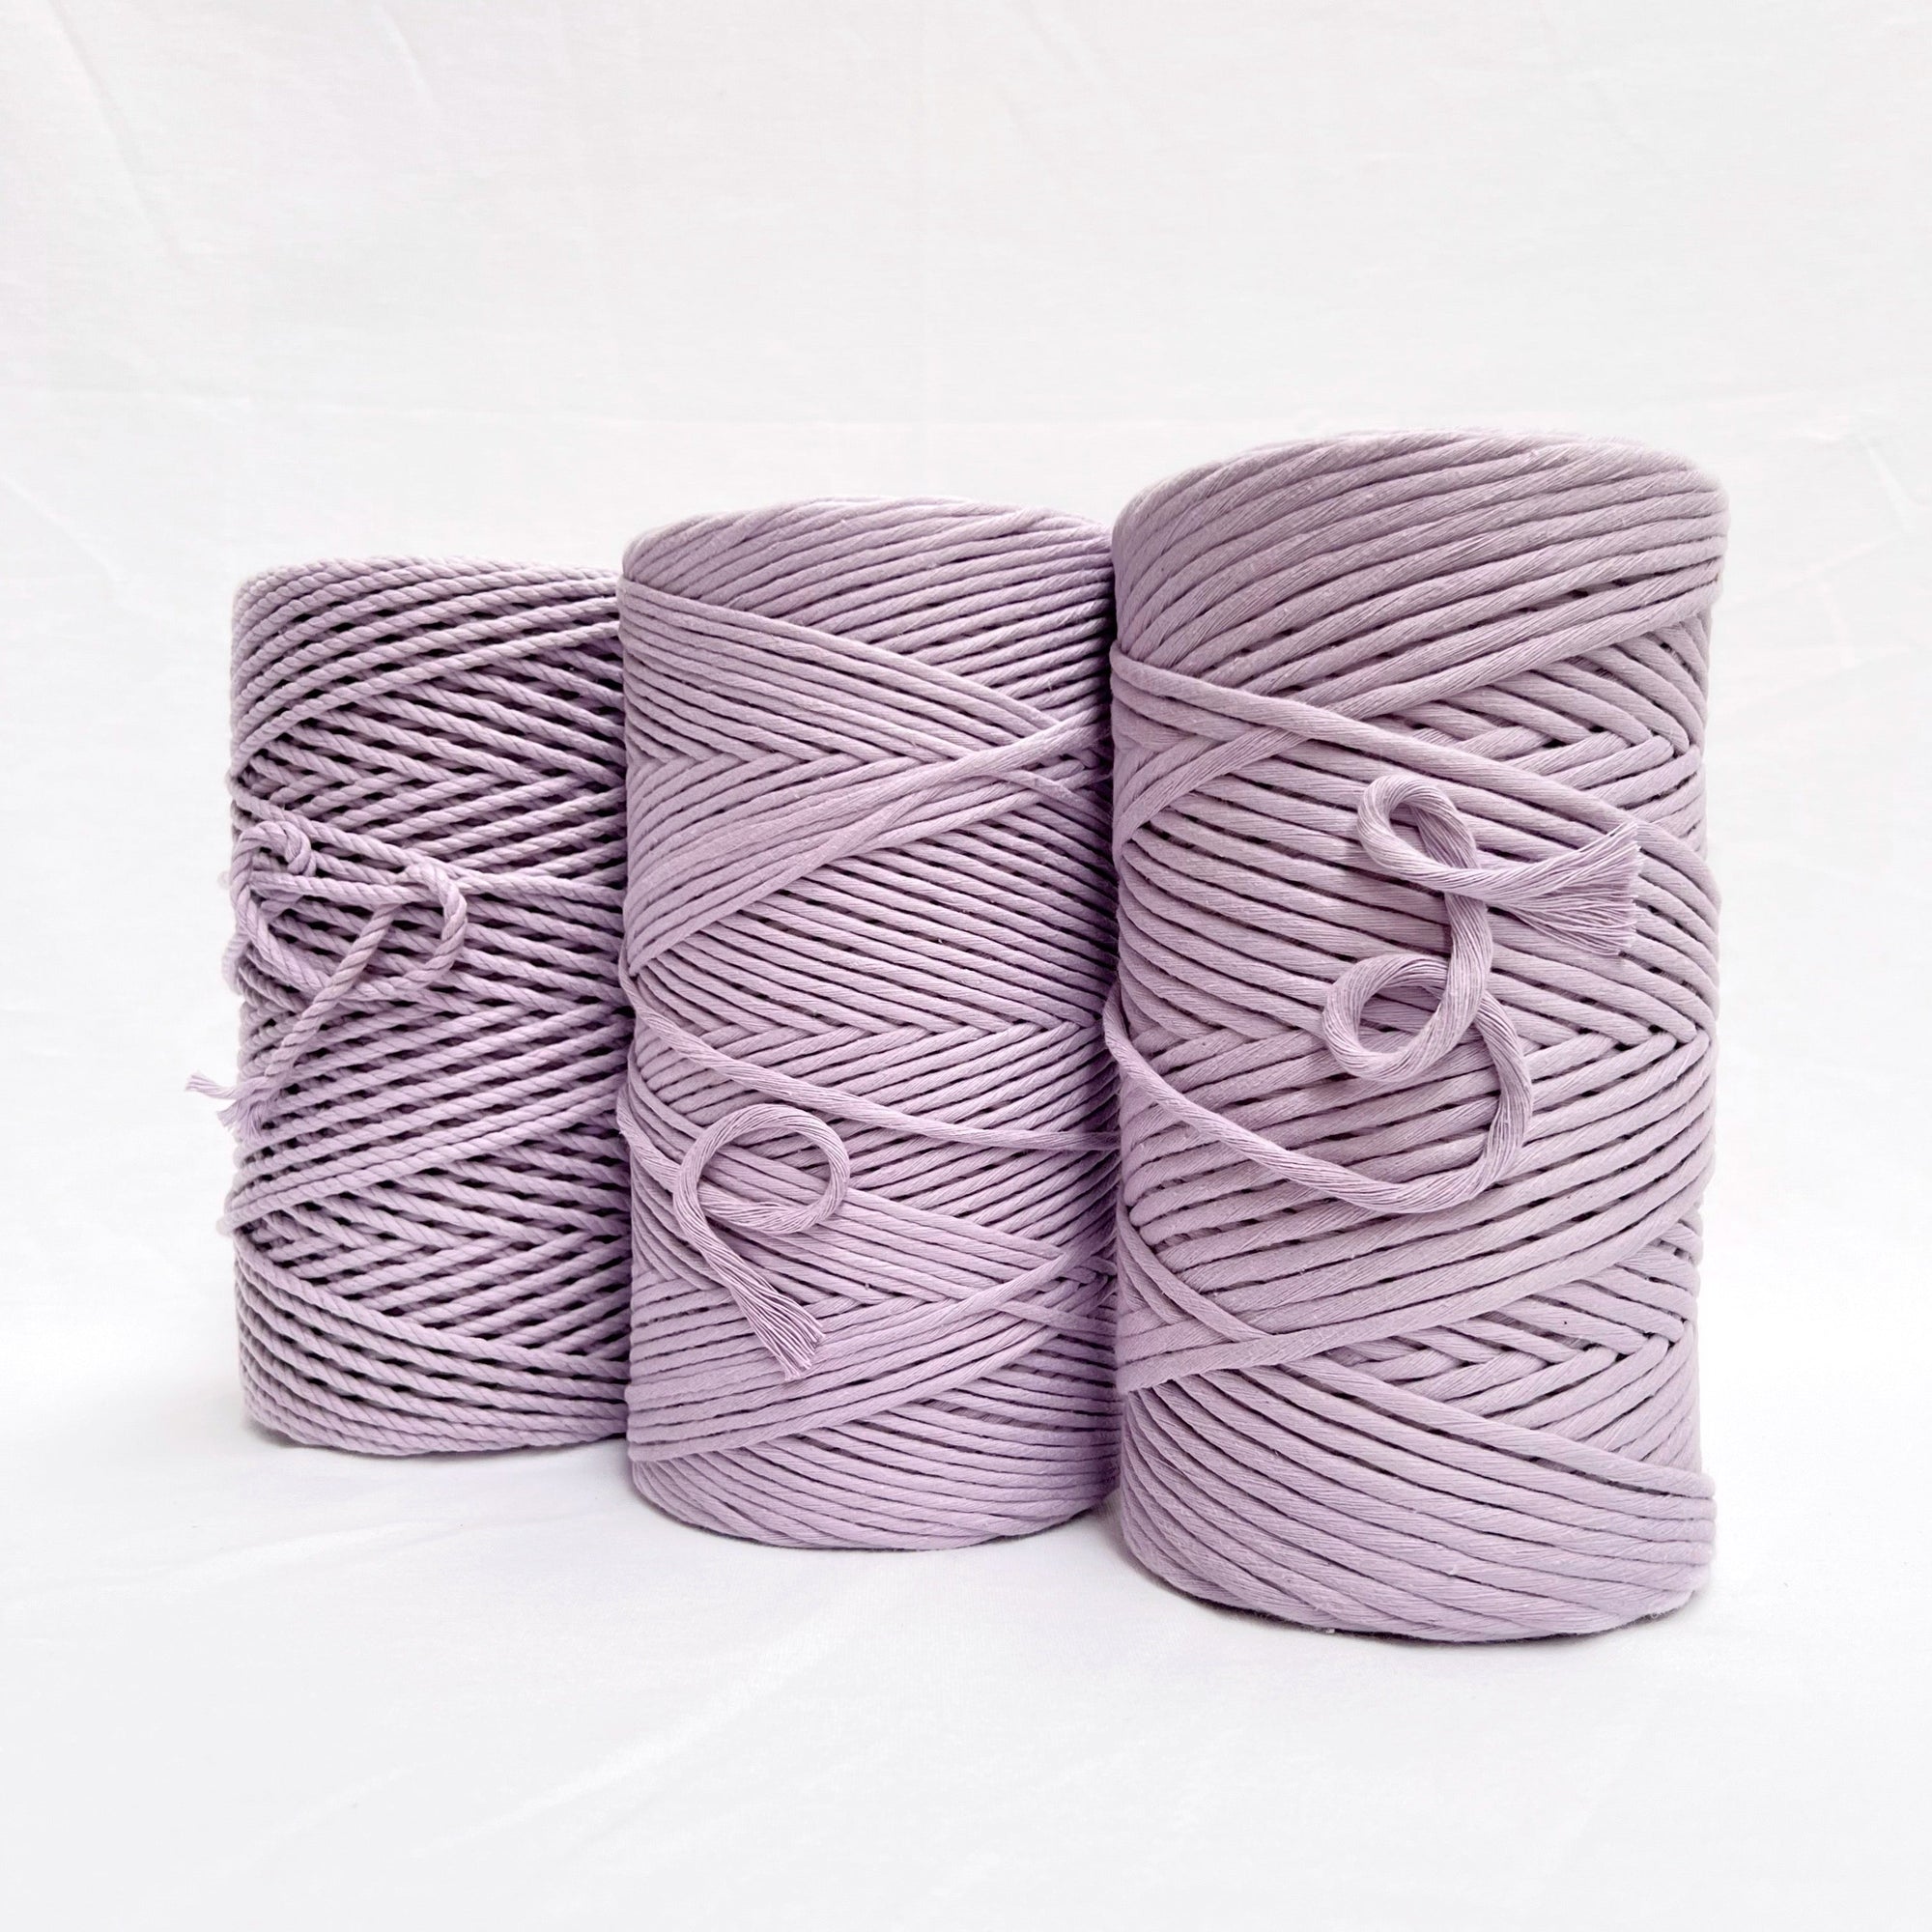 mary maker studio 1kg 5mm recycled cotton macrame string in iced lilac purple colour suitable for macrame workshops beginners and advanced artists